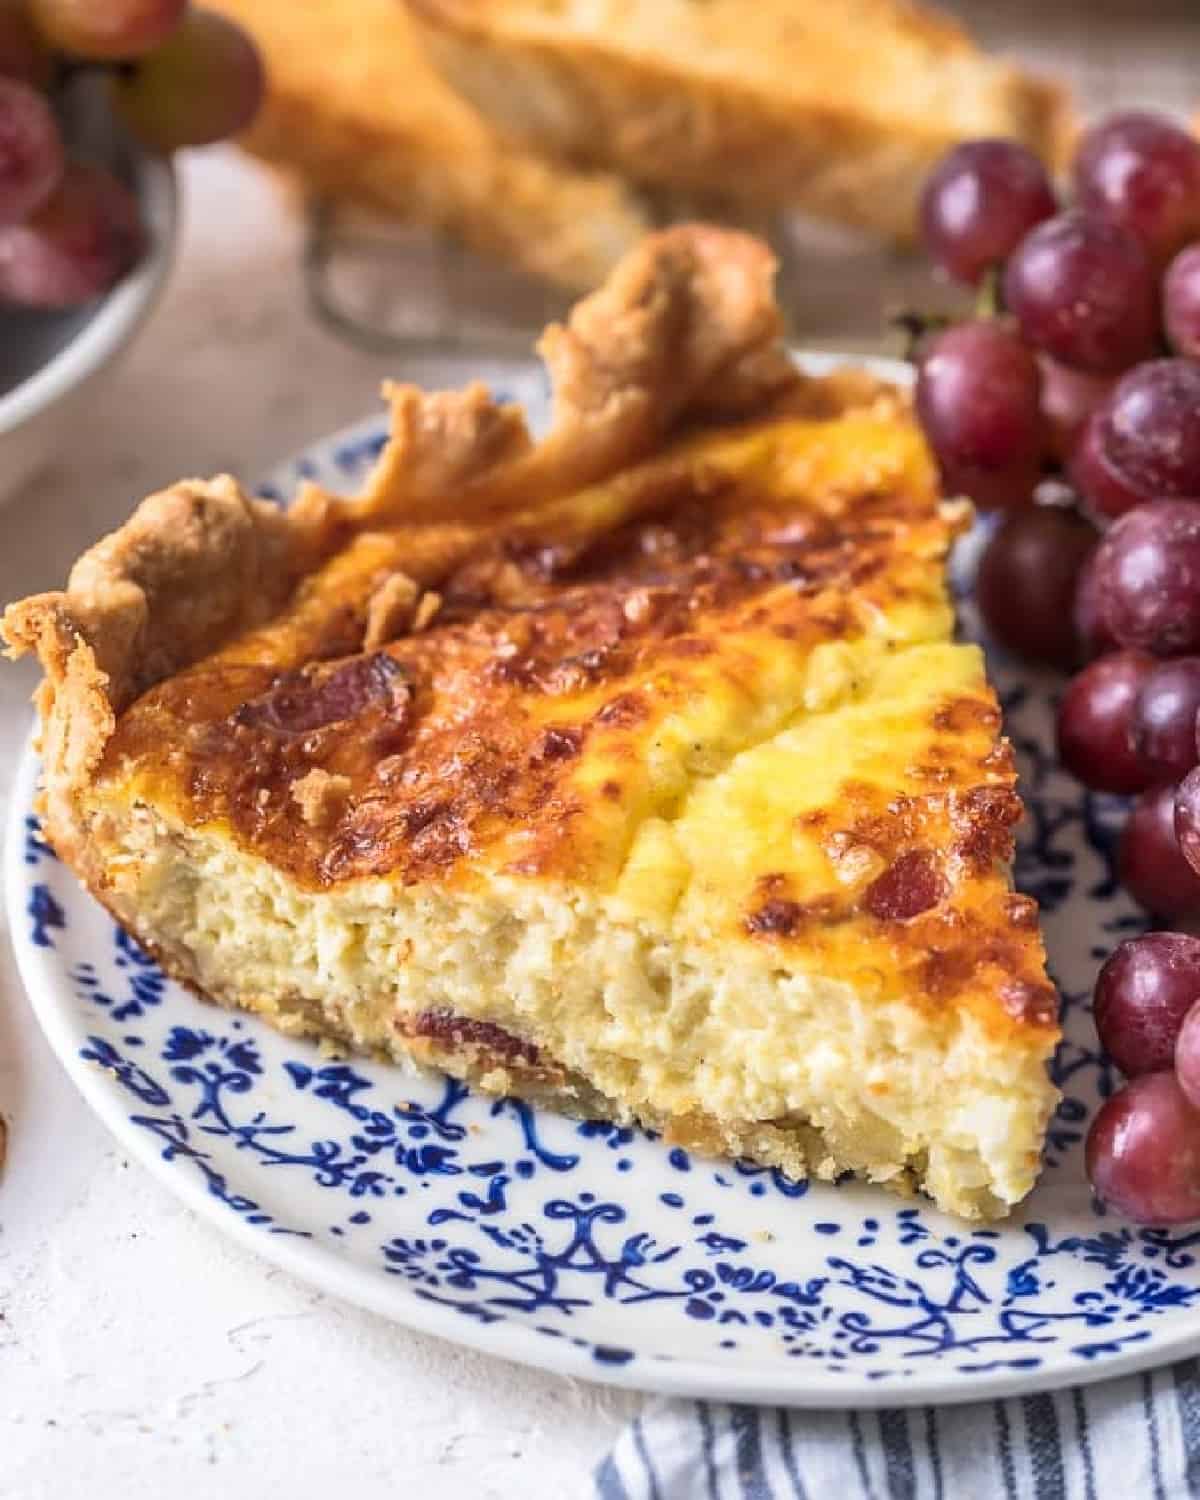 slice of quiche lorraine on a blue plate